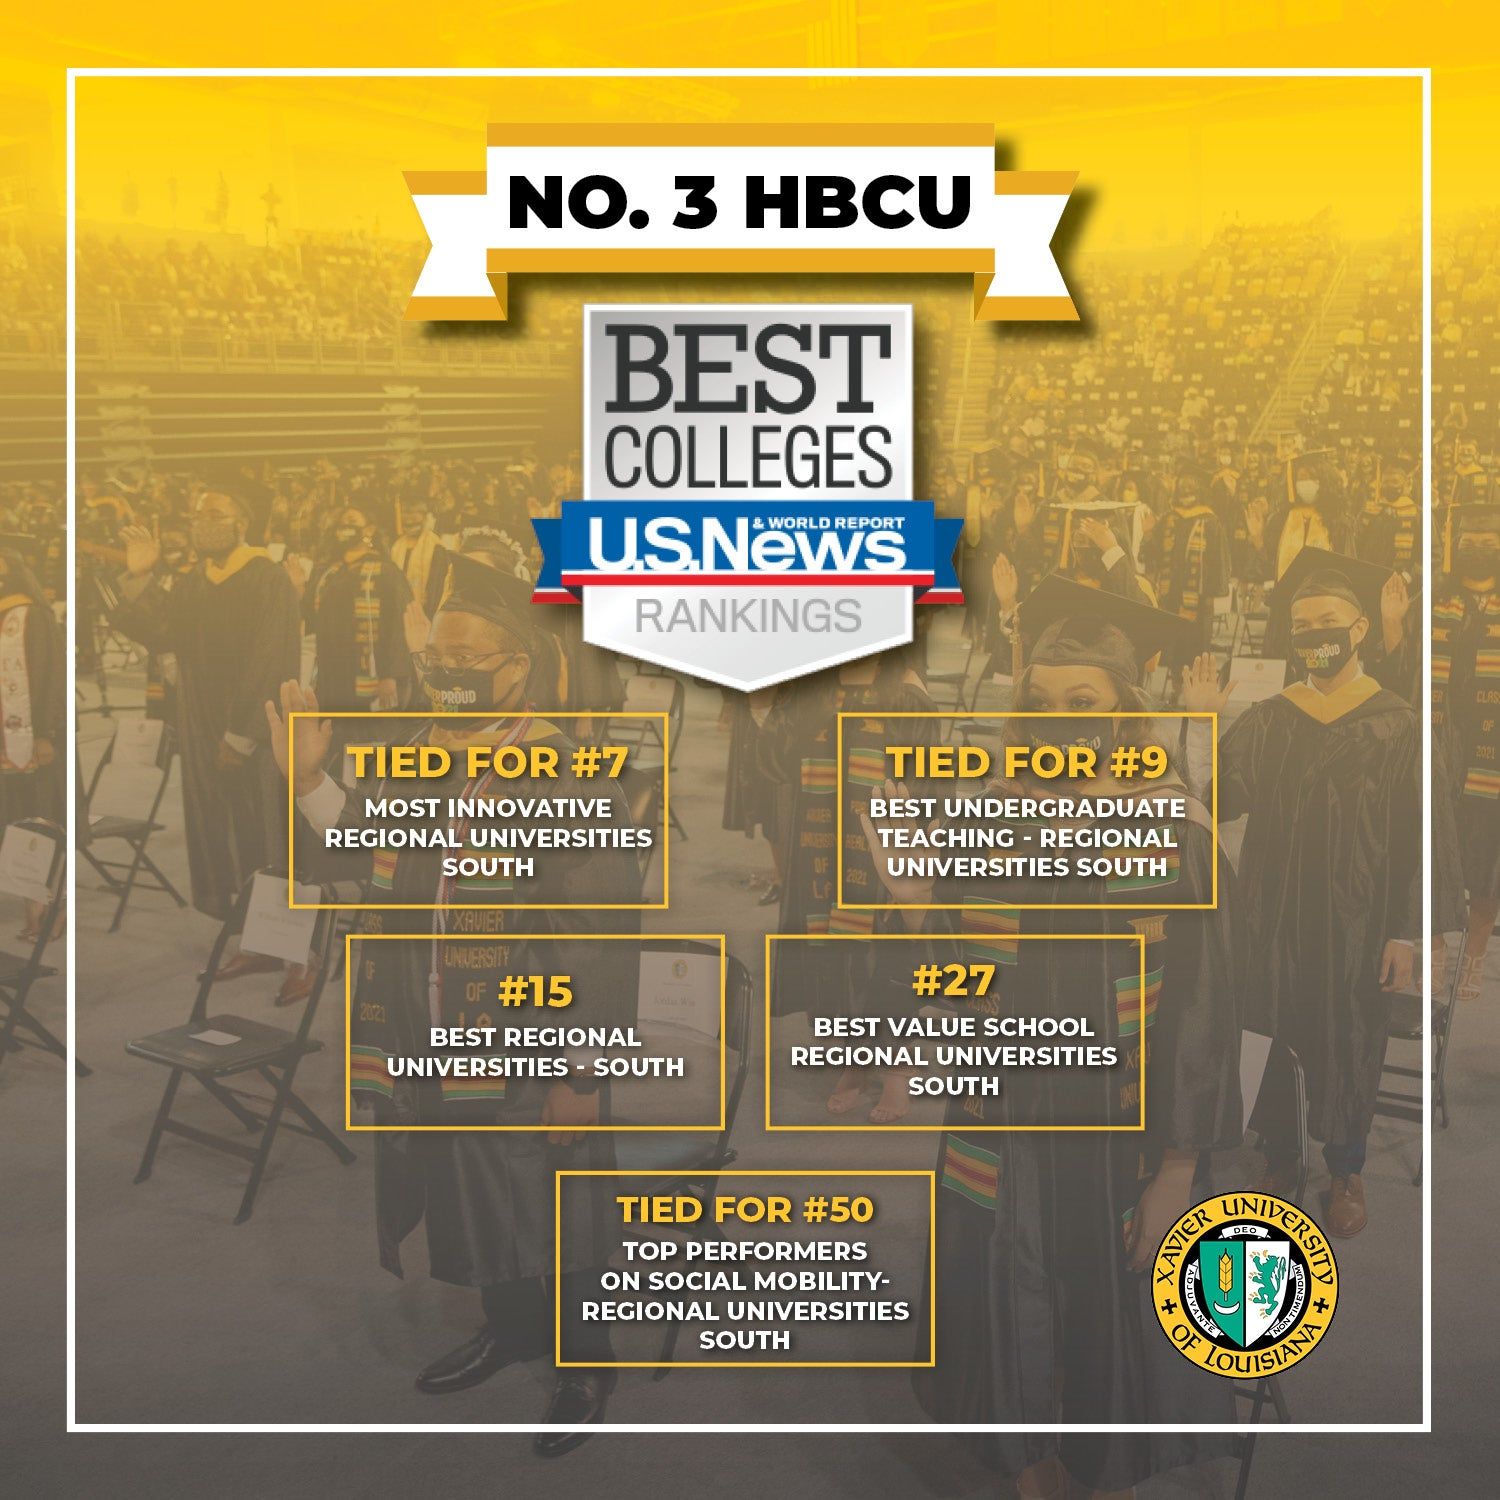 XULA named #3 HBCU in the nation